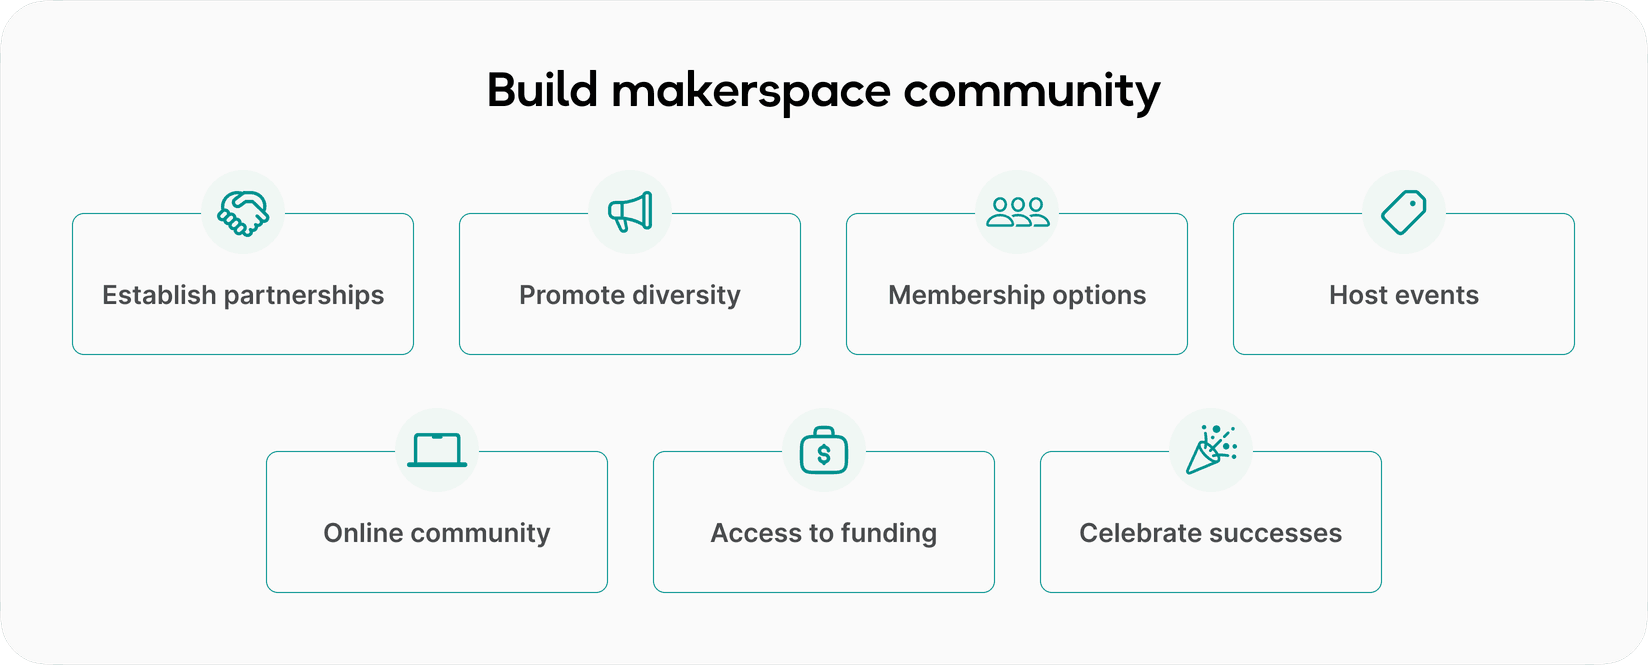 How to build makerspace community